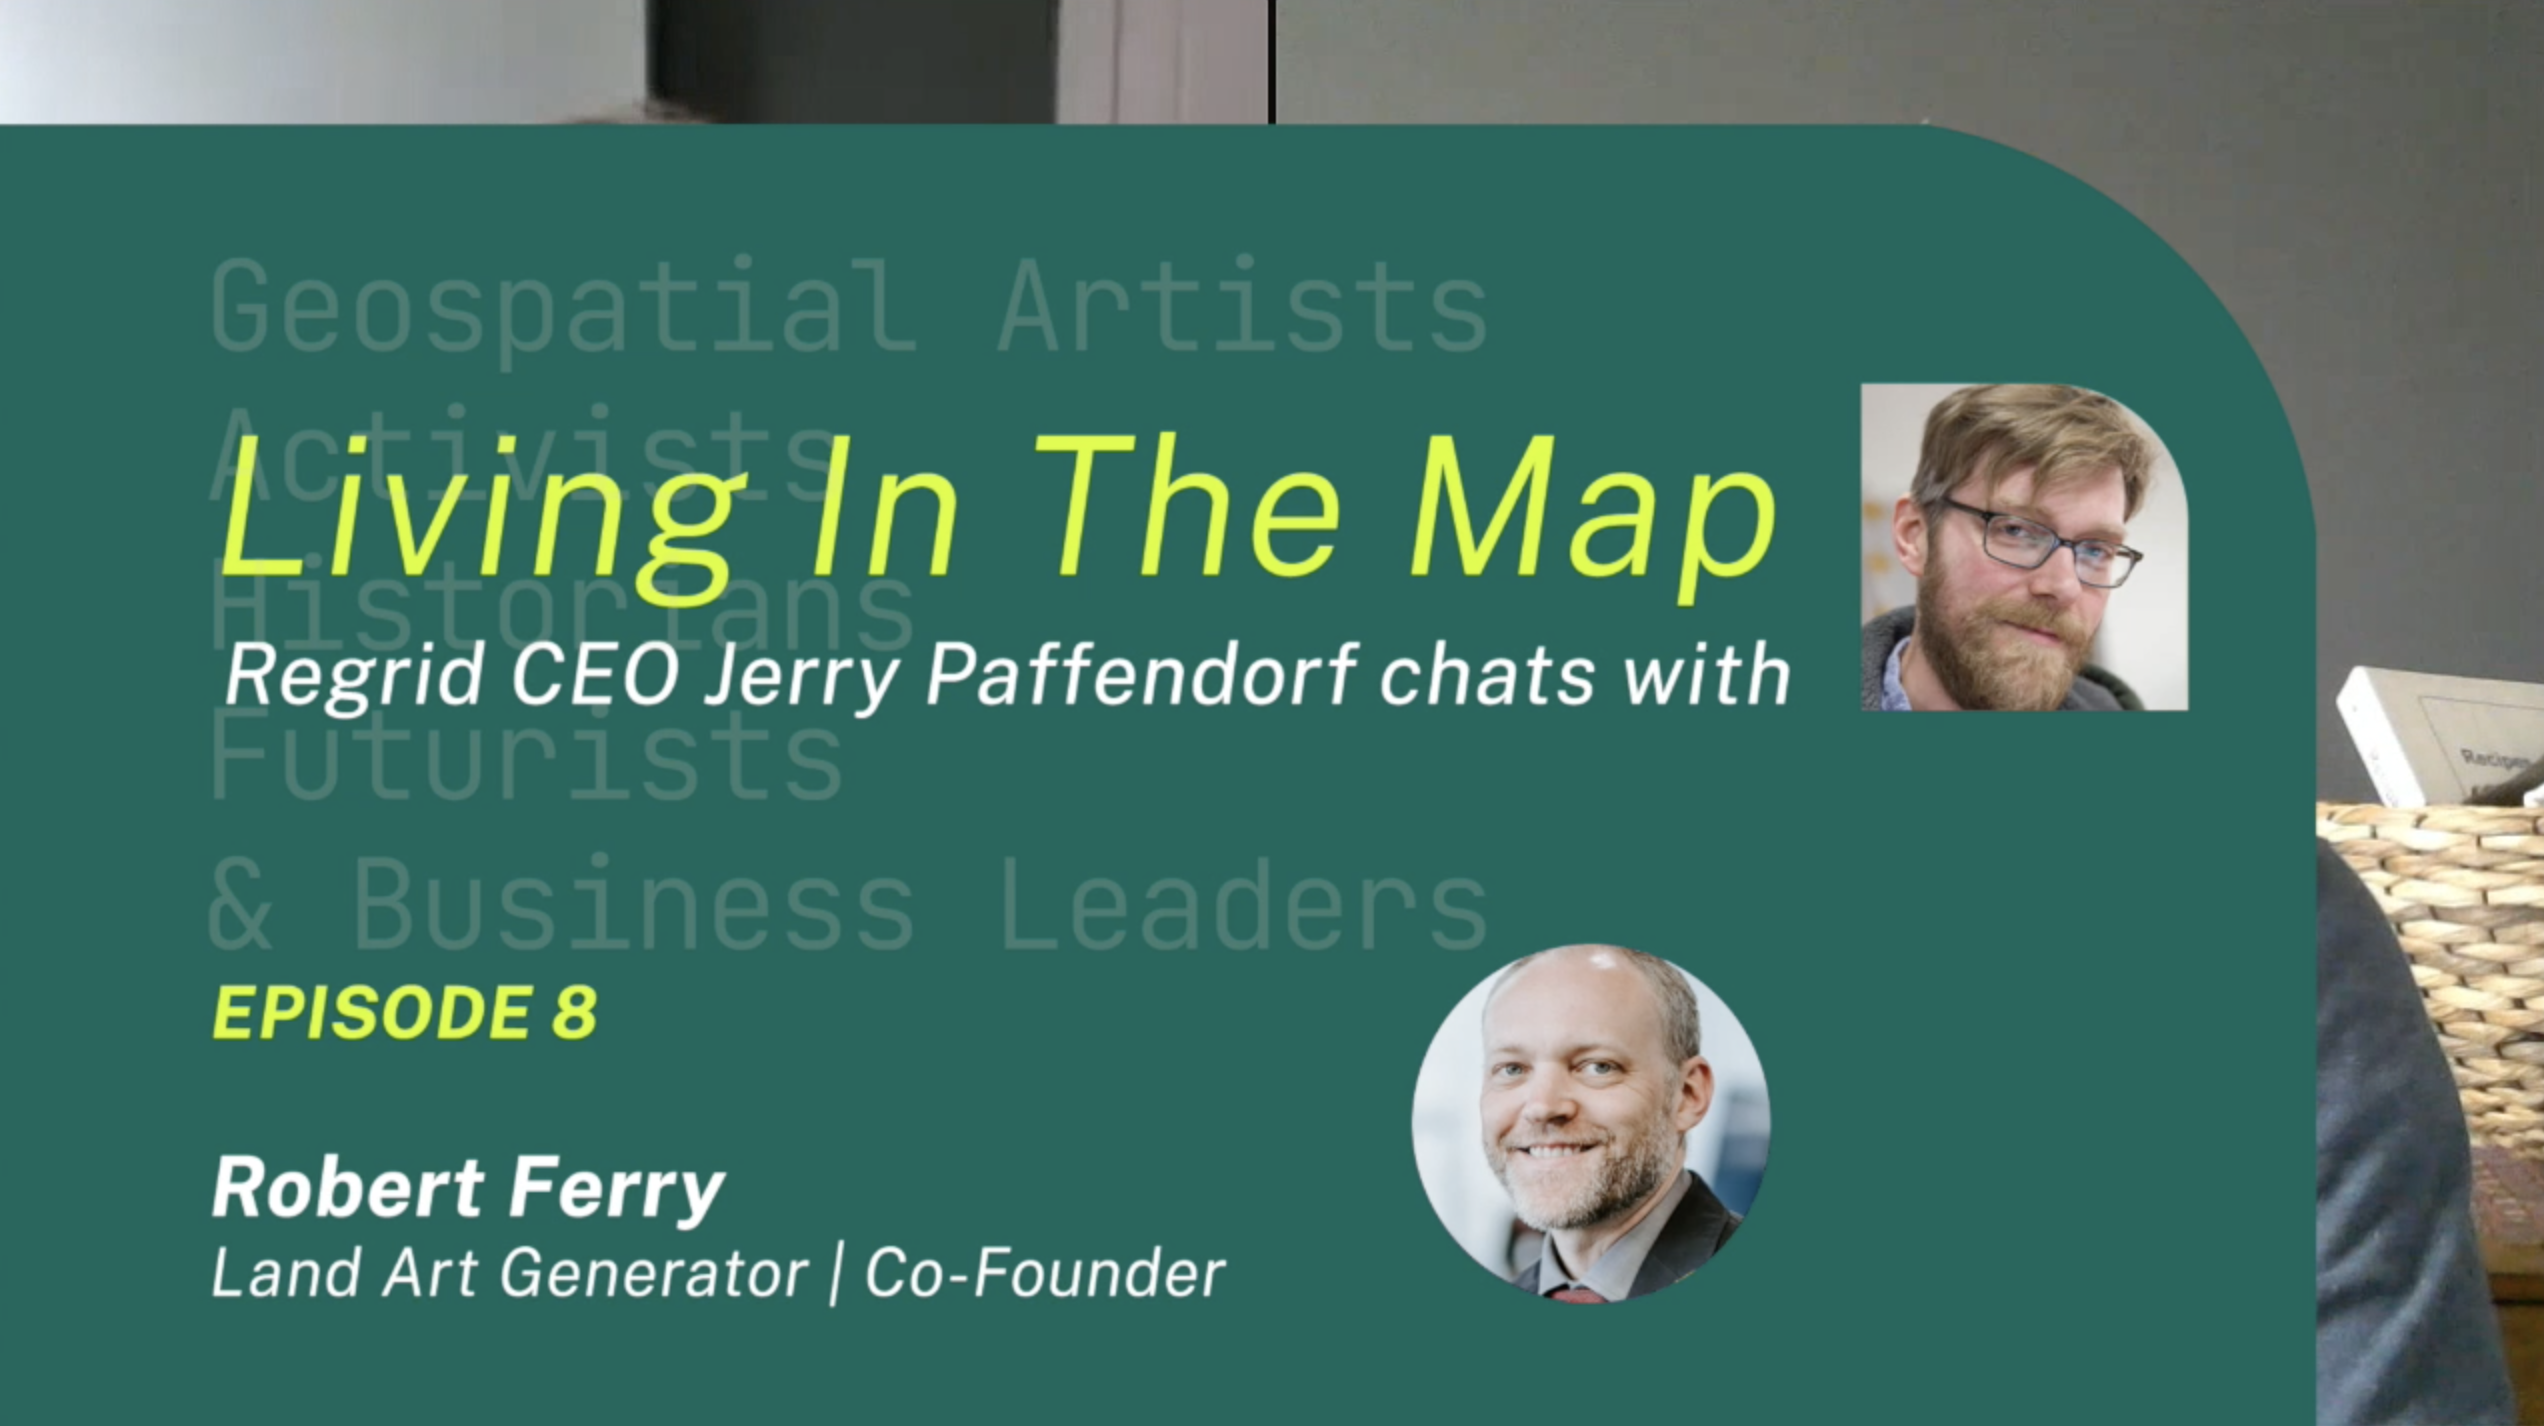 Living In The Map with Regrid CEO - Jerry Paffendorf chats with Robert Ferry, co-founder of Land Art Generator